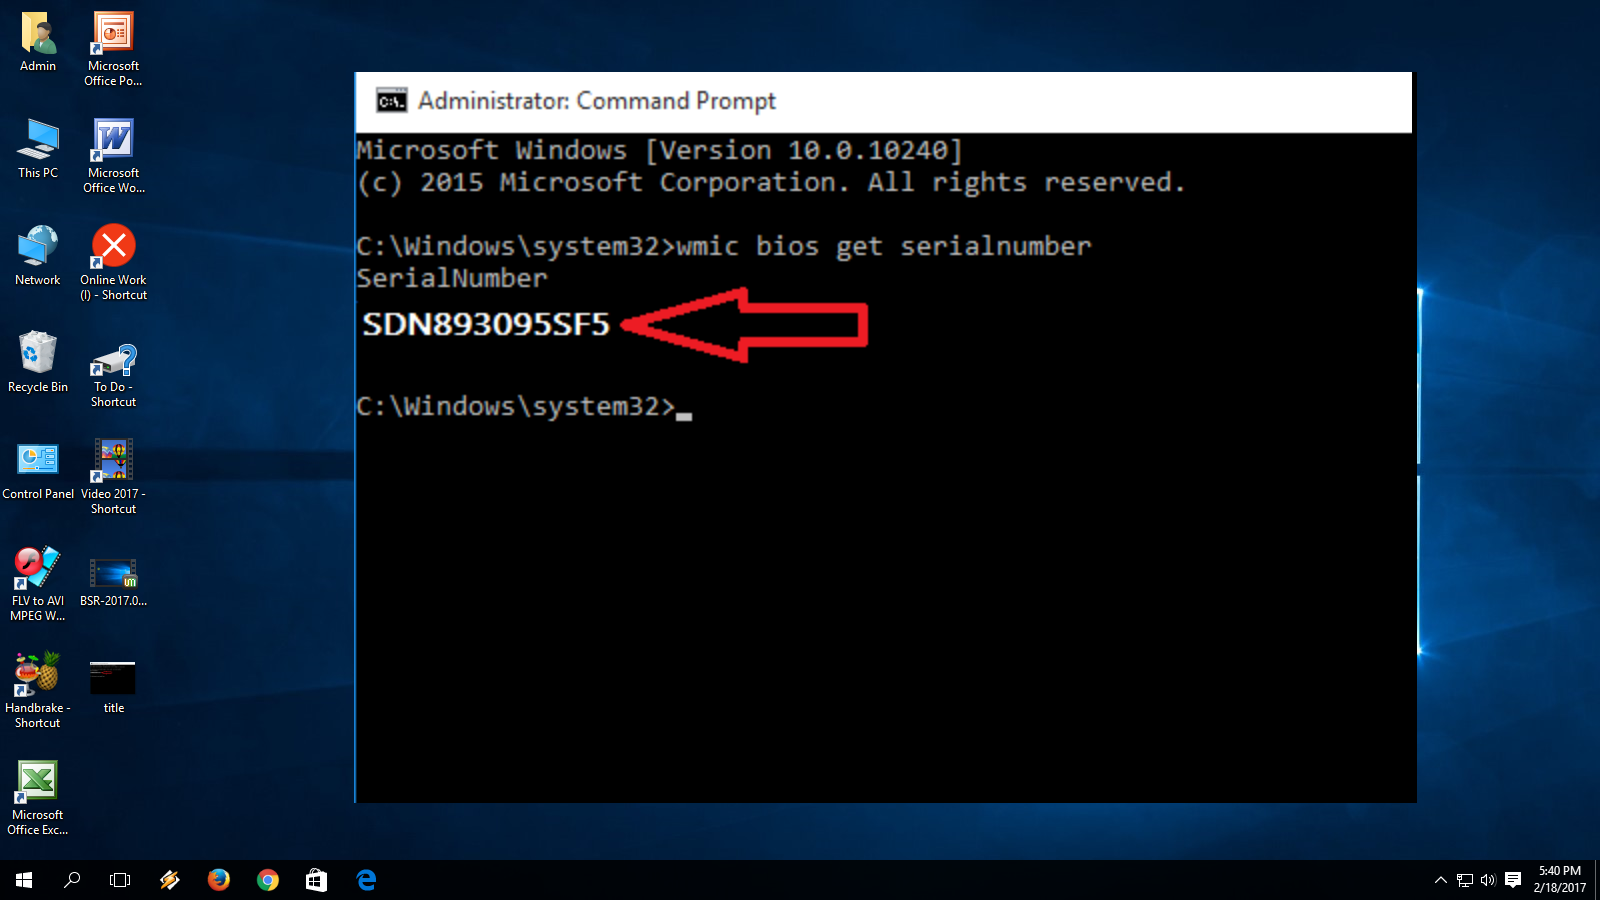 check serial number command prompt